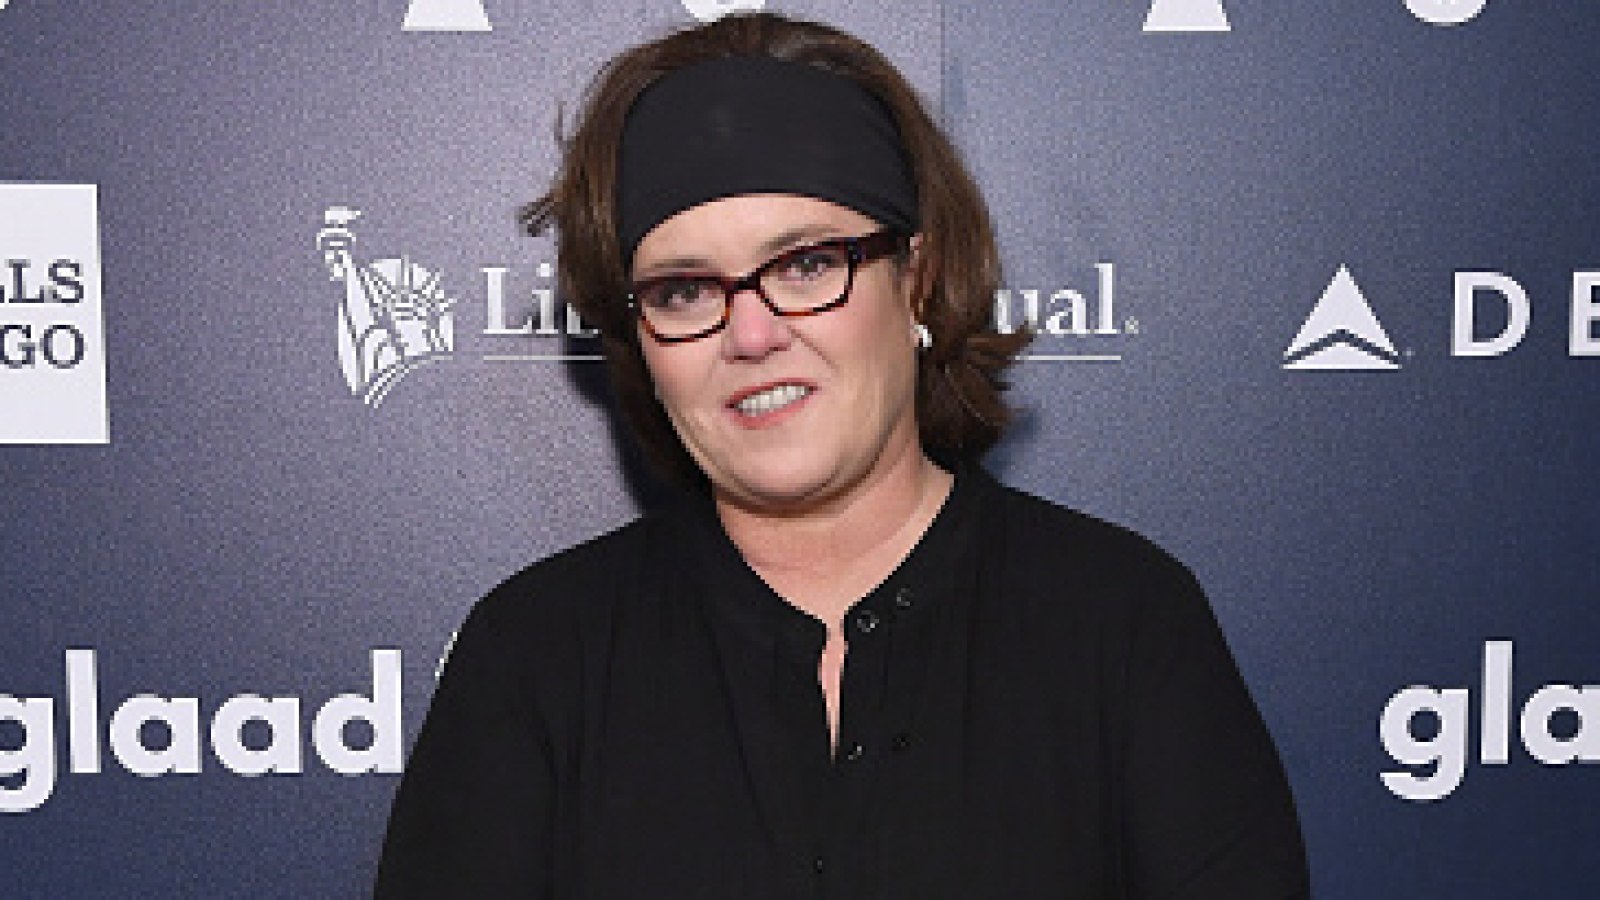 Rosie O'Donnell References Trouble With Daughter in GLAAD Speech